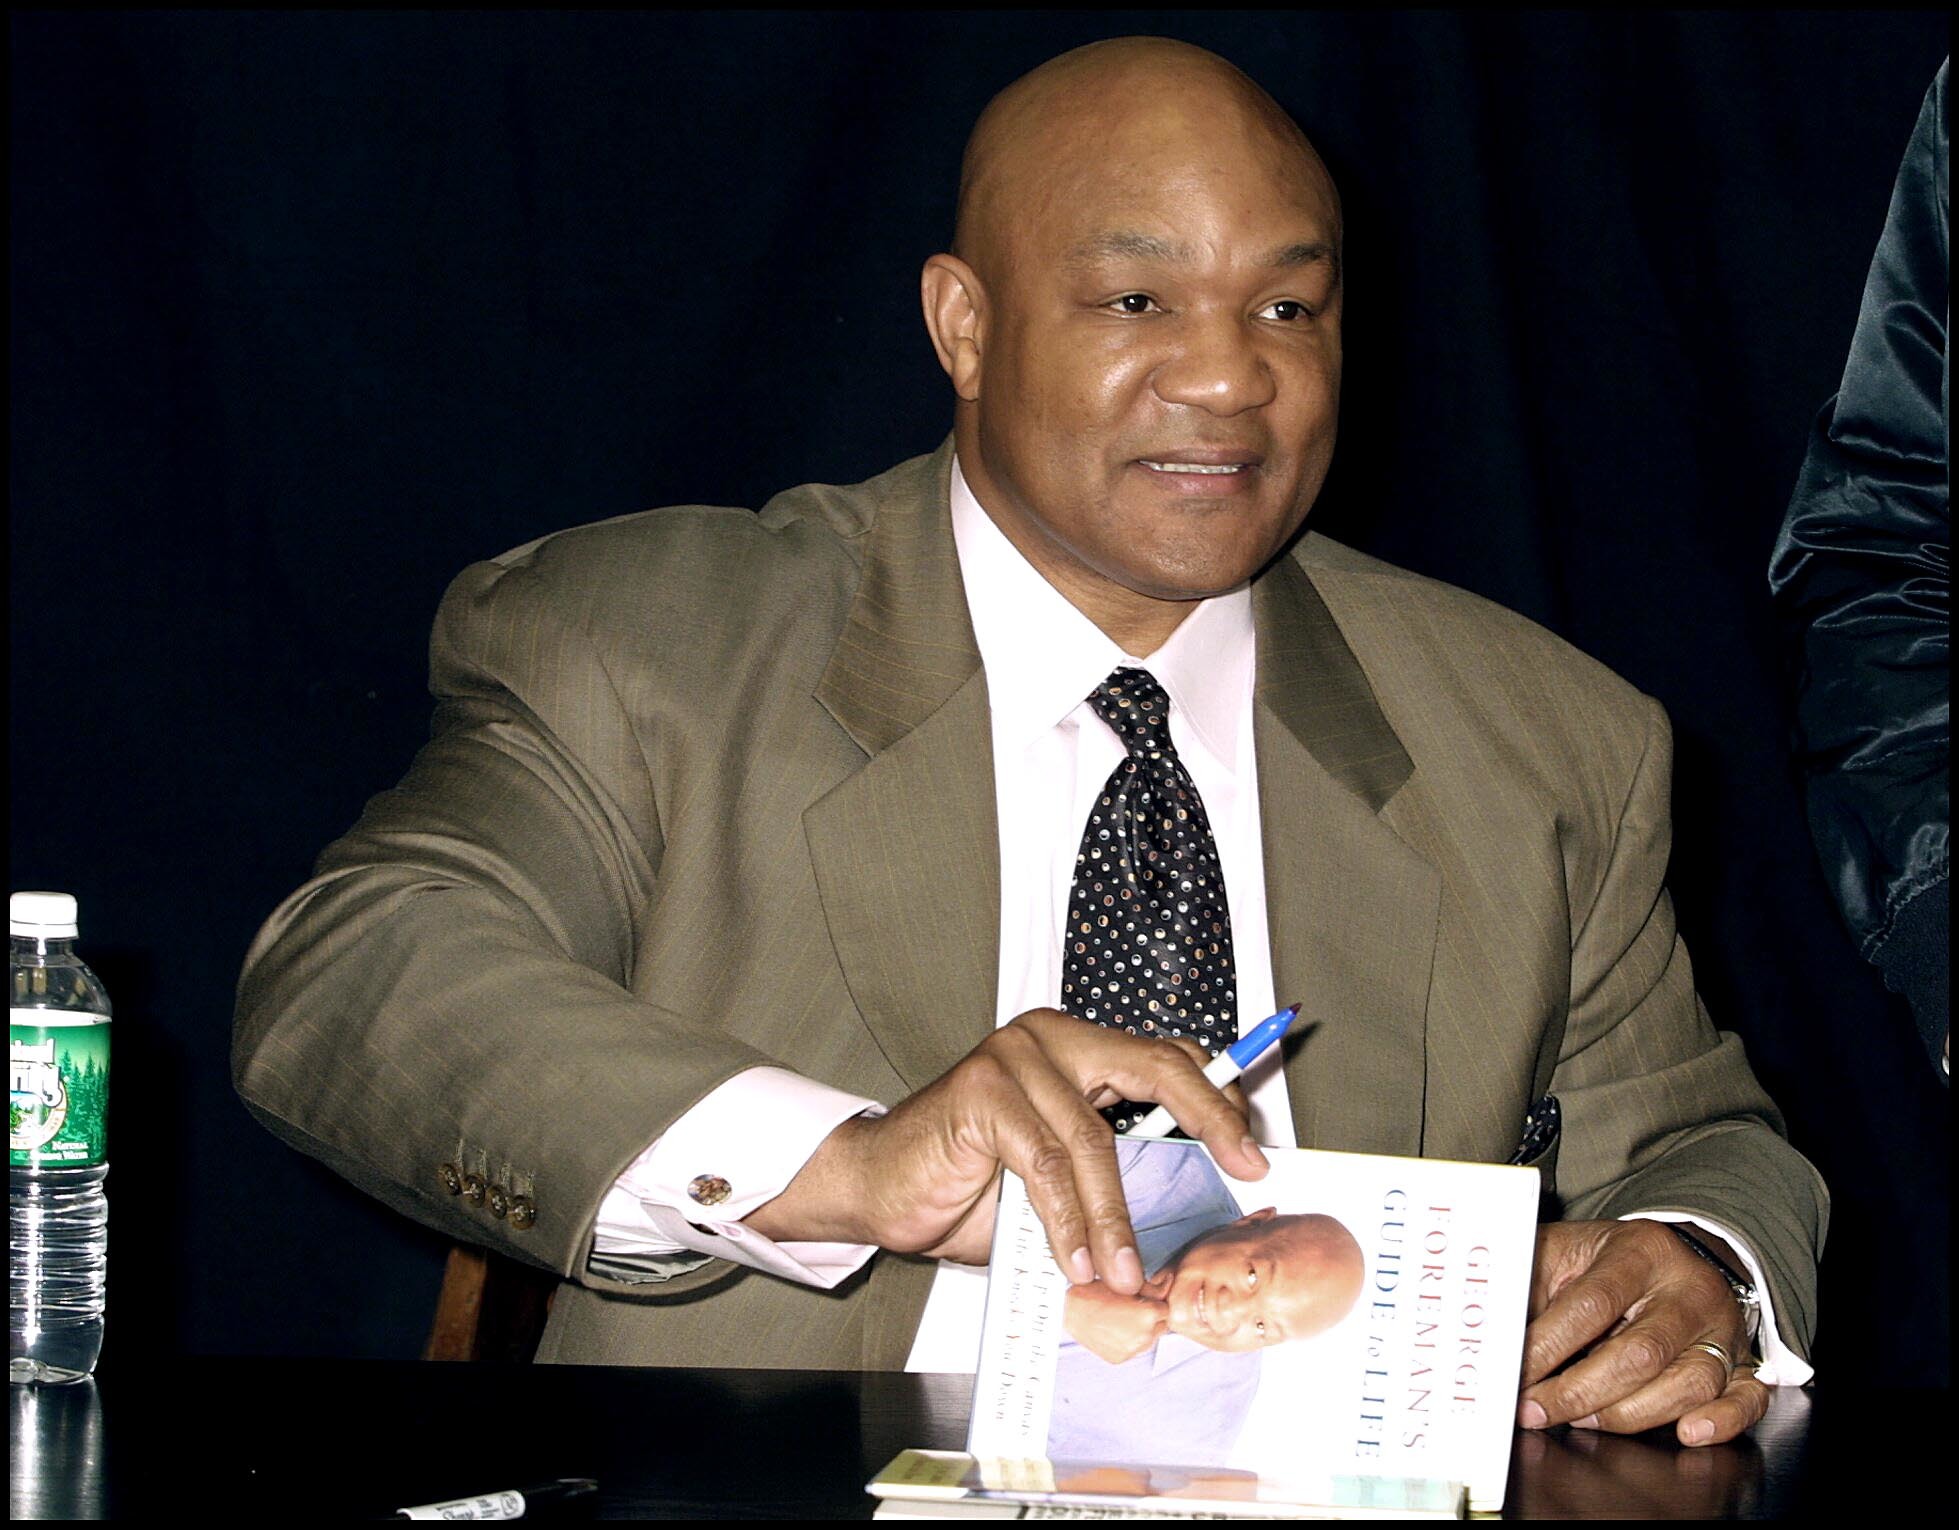 George Foreman wearing a light green coat while holding a book